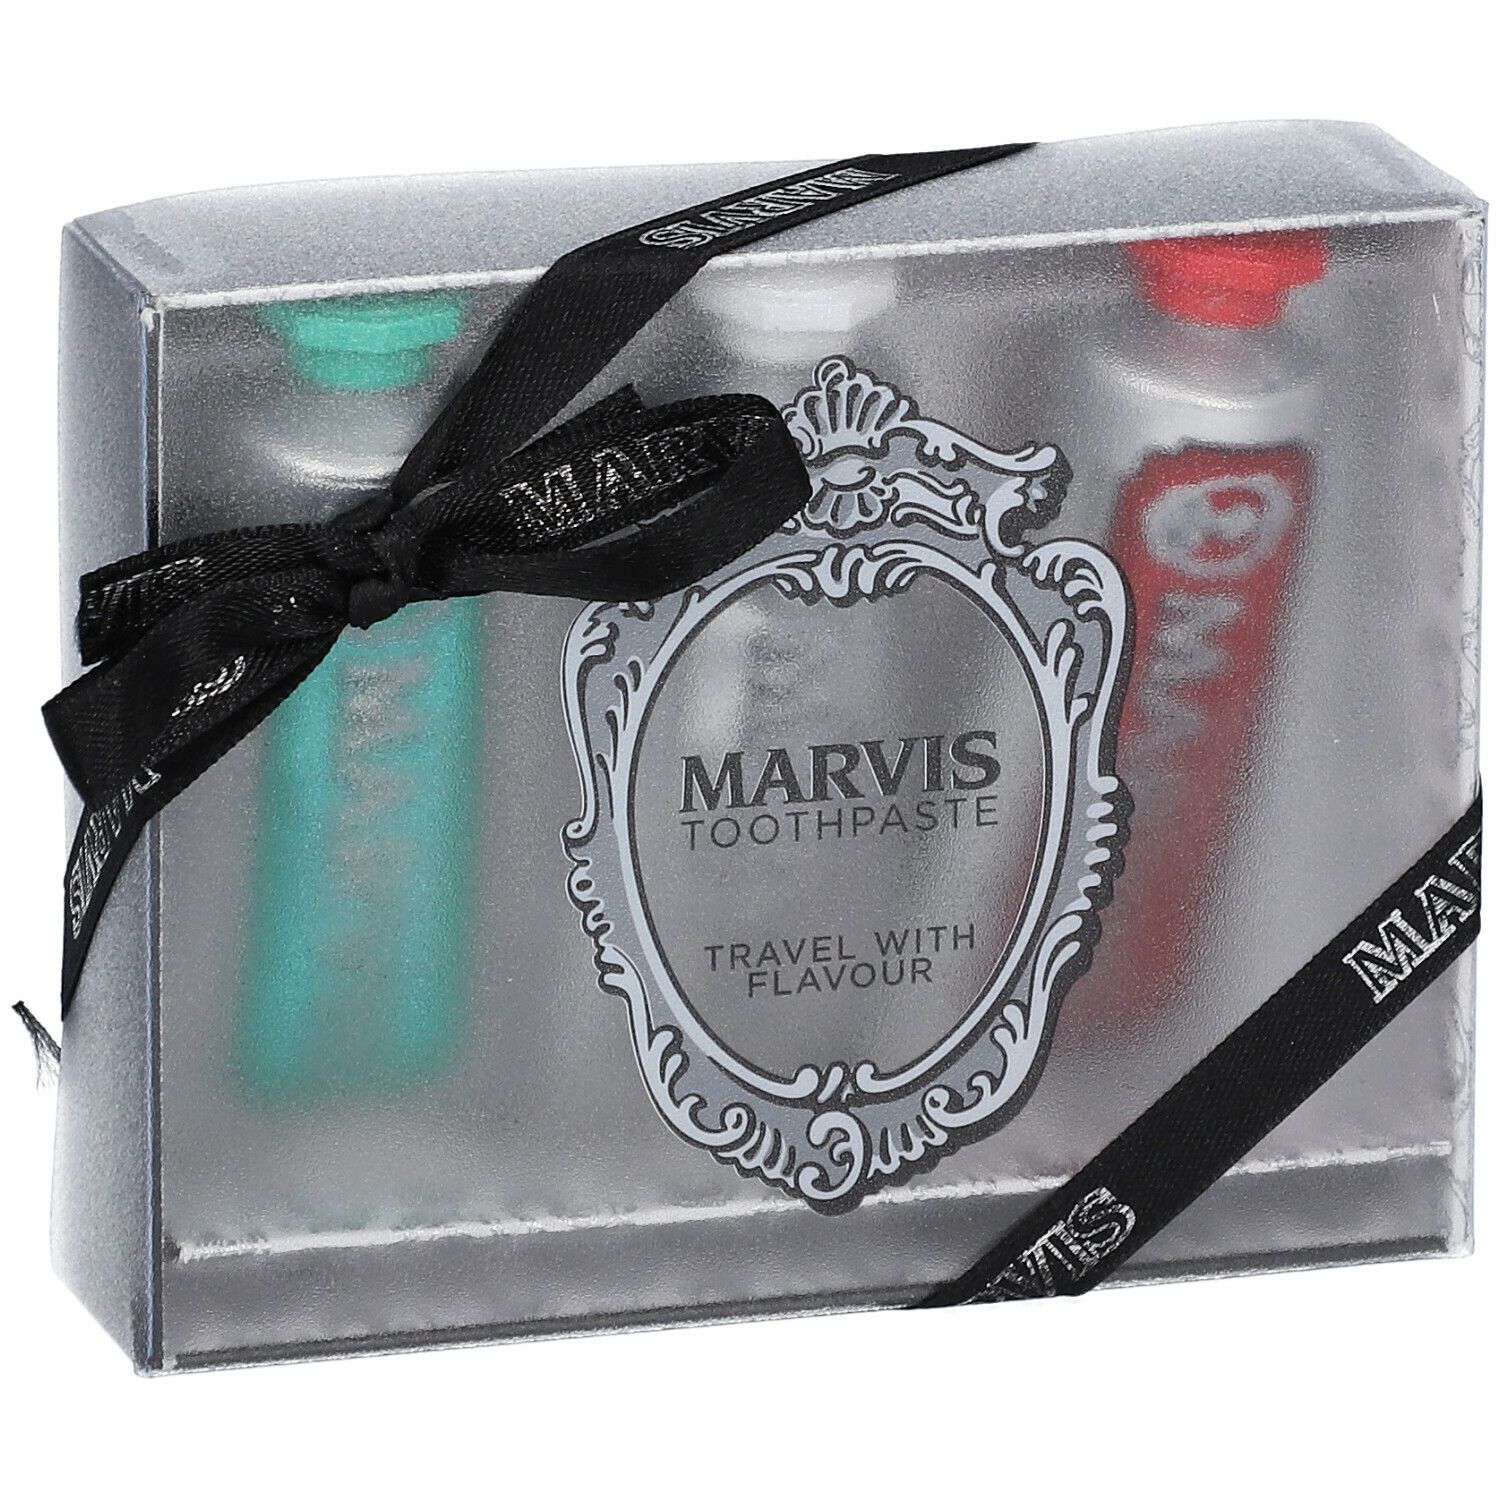 MARVIS 3 Flavours Box